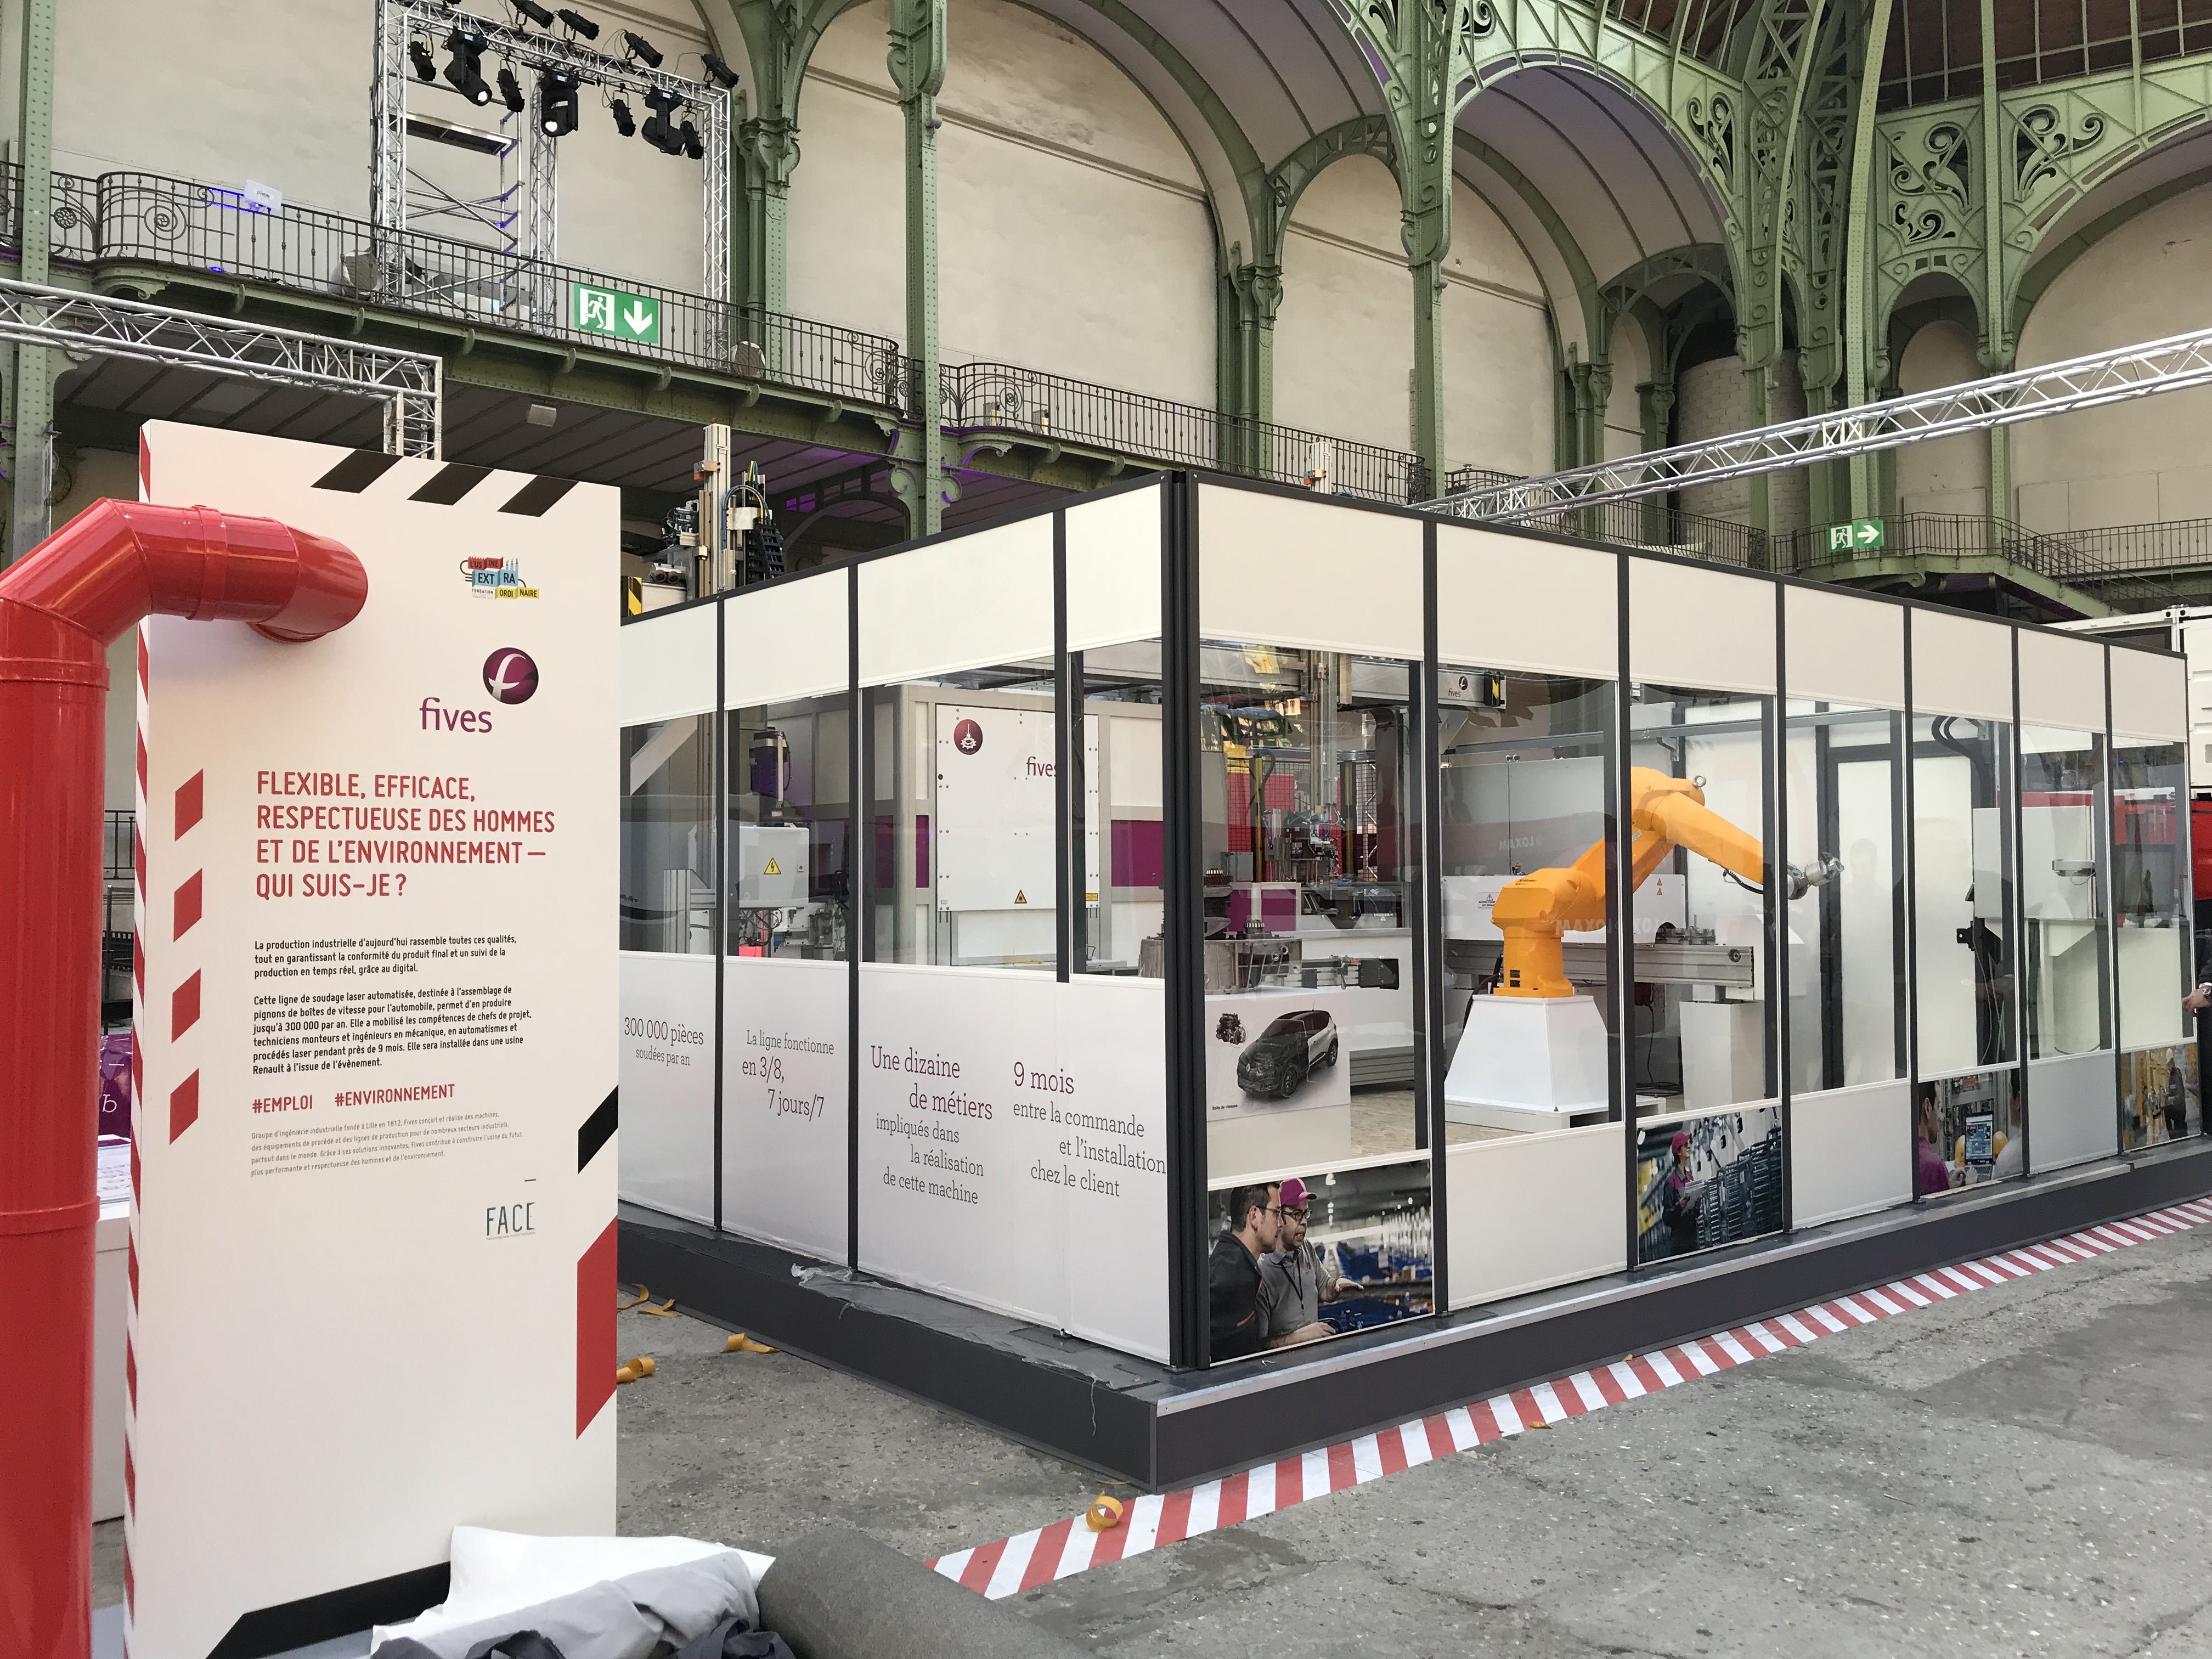 An automated laser welding line designed by Fives at the Grand Palais